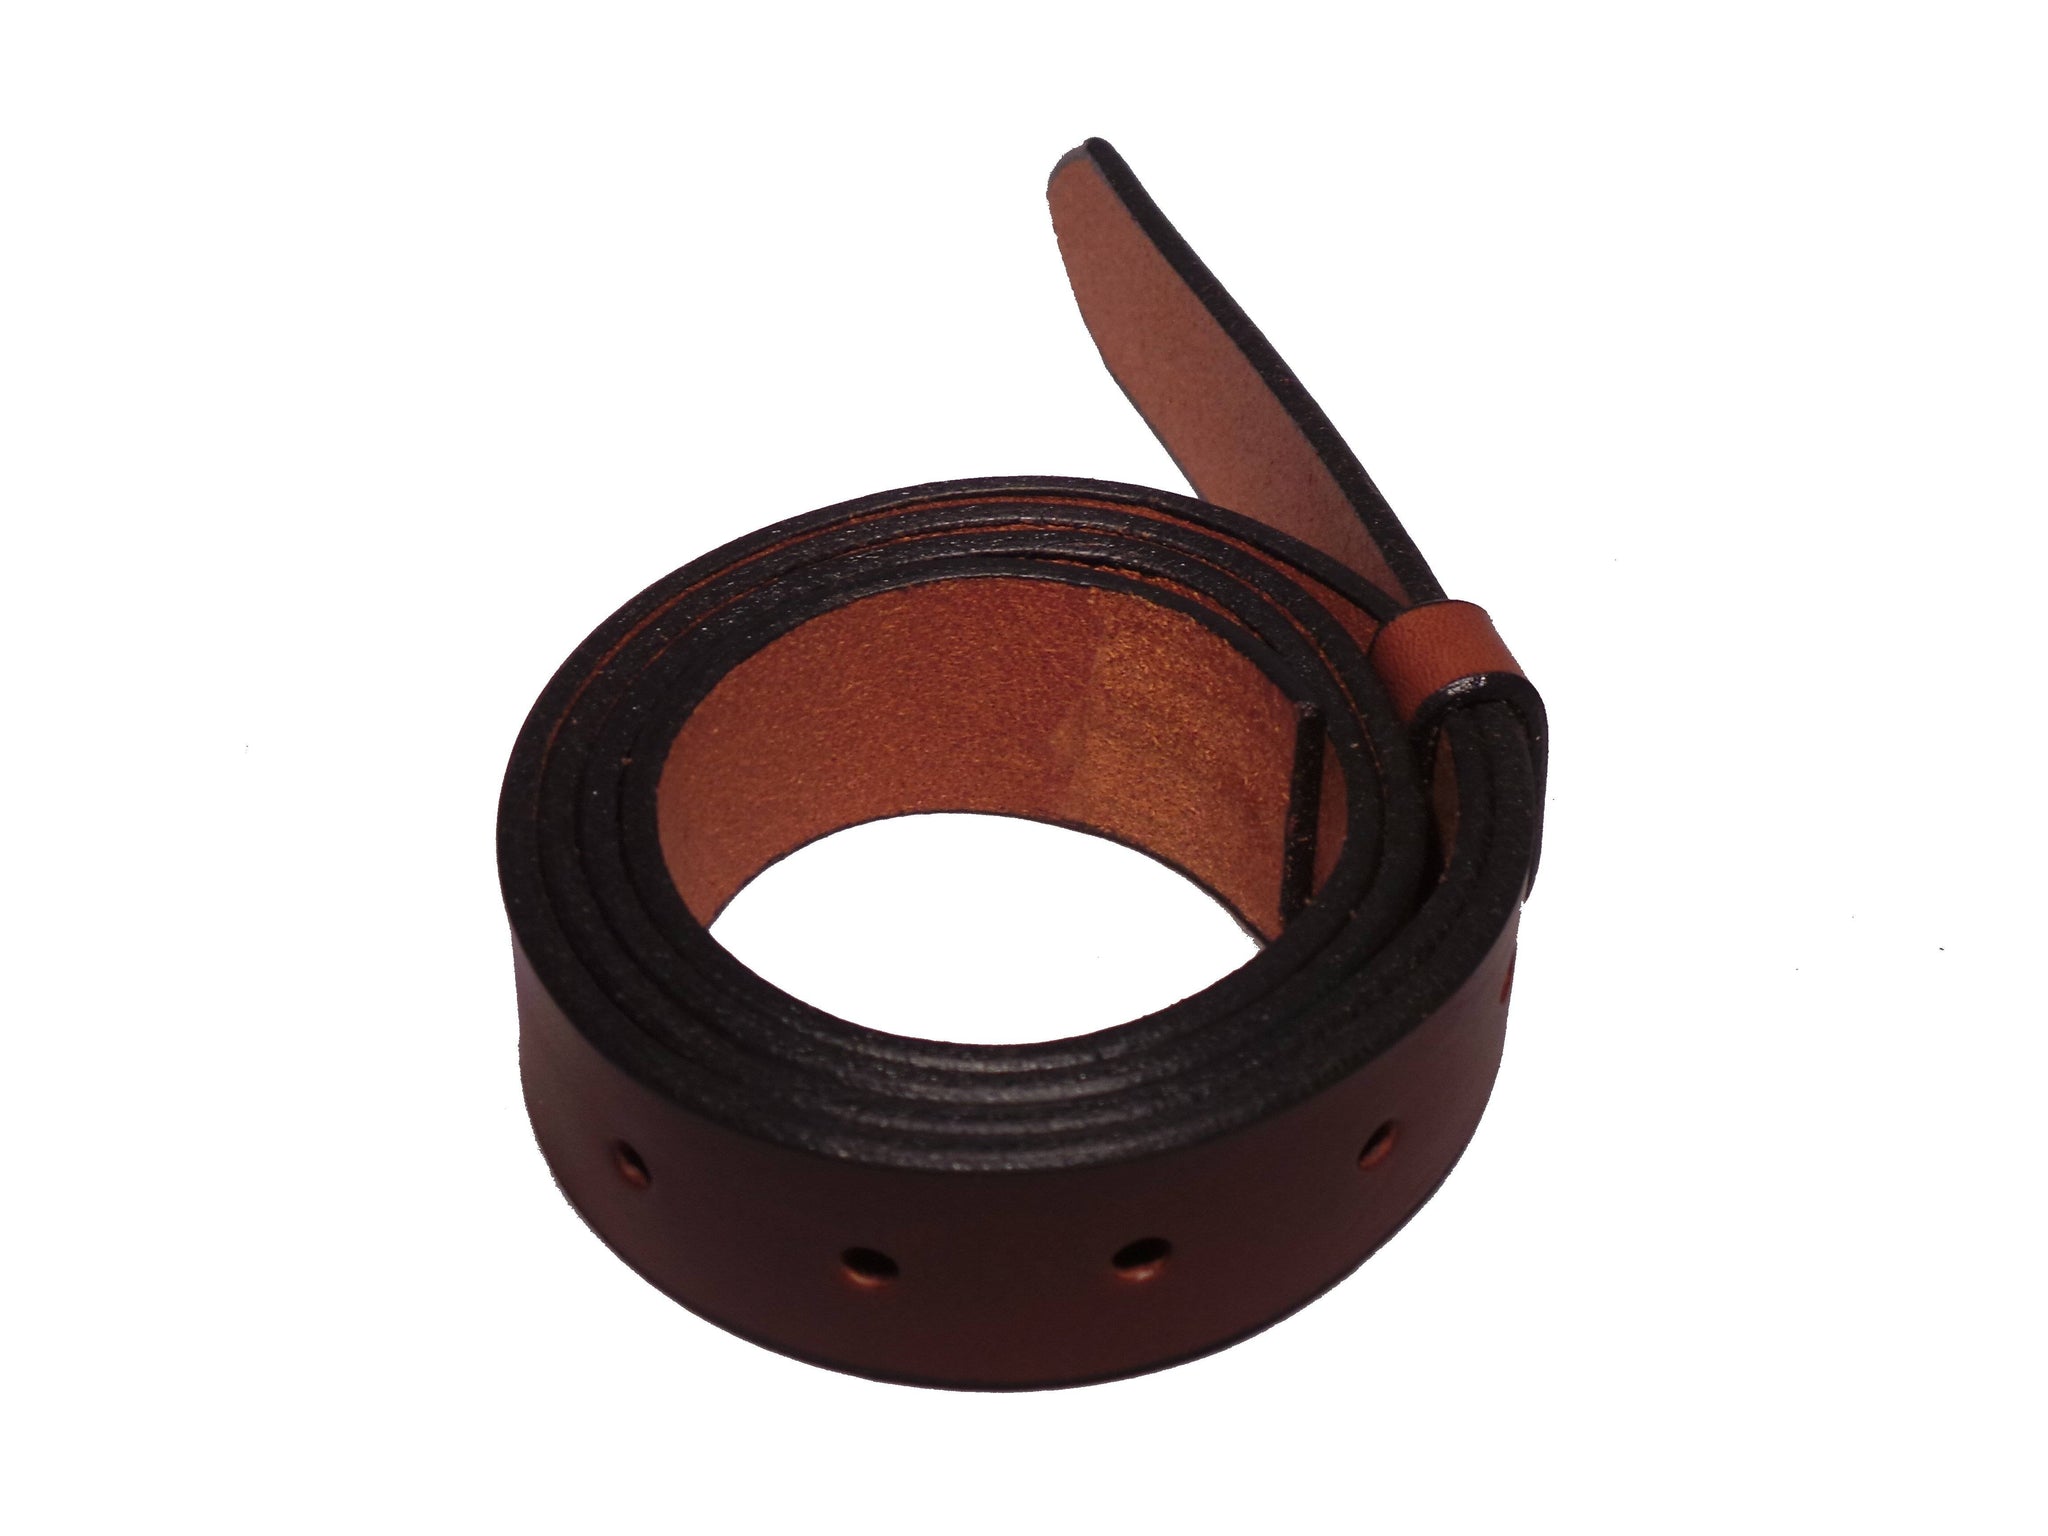 Leather Strap, Leather Strip, Leather Band, Natural Leather Belt Blank.  9-10 oz 51-55. (Brown Cognac, 1 1/2 inch (38mm.))